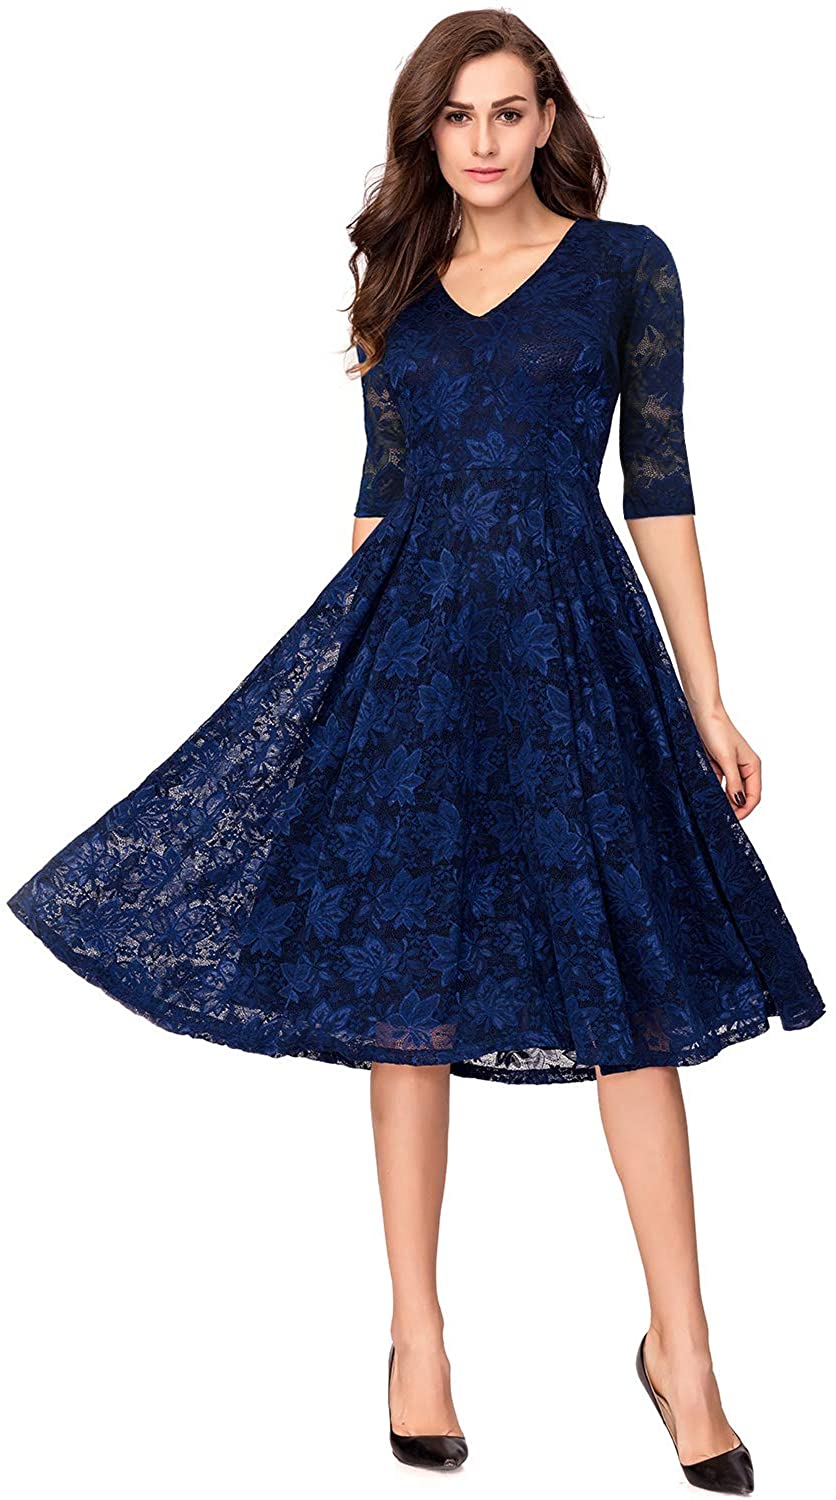 Noctflos Women's 3/4 Sleeves Lace Fit & Flare Midi Cocktail Dress for